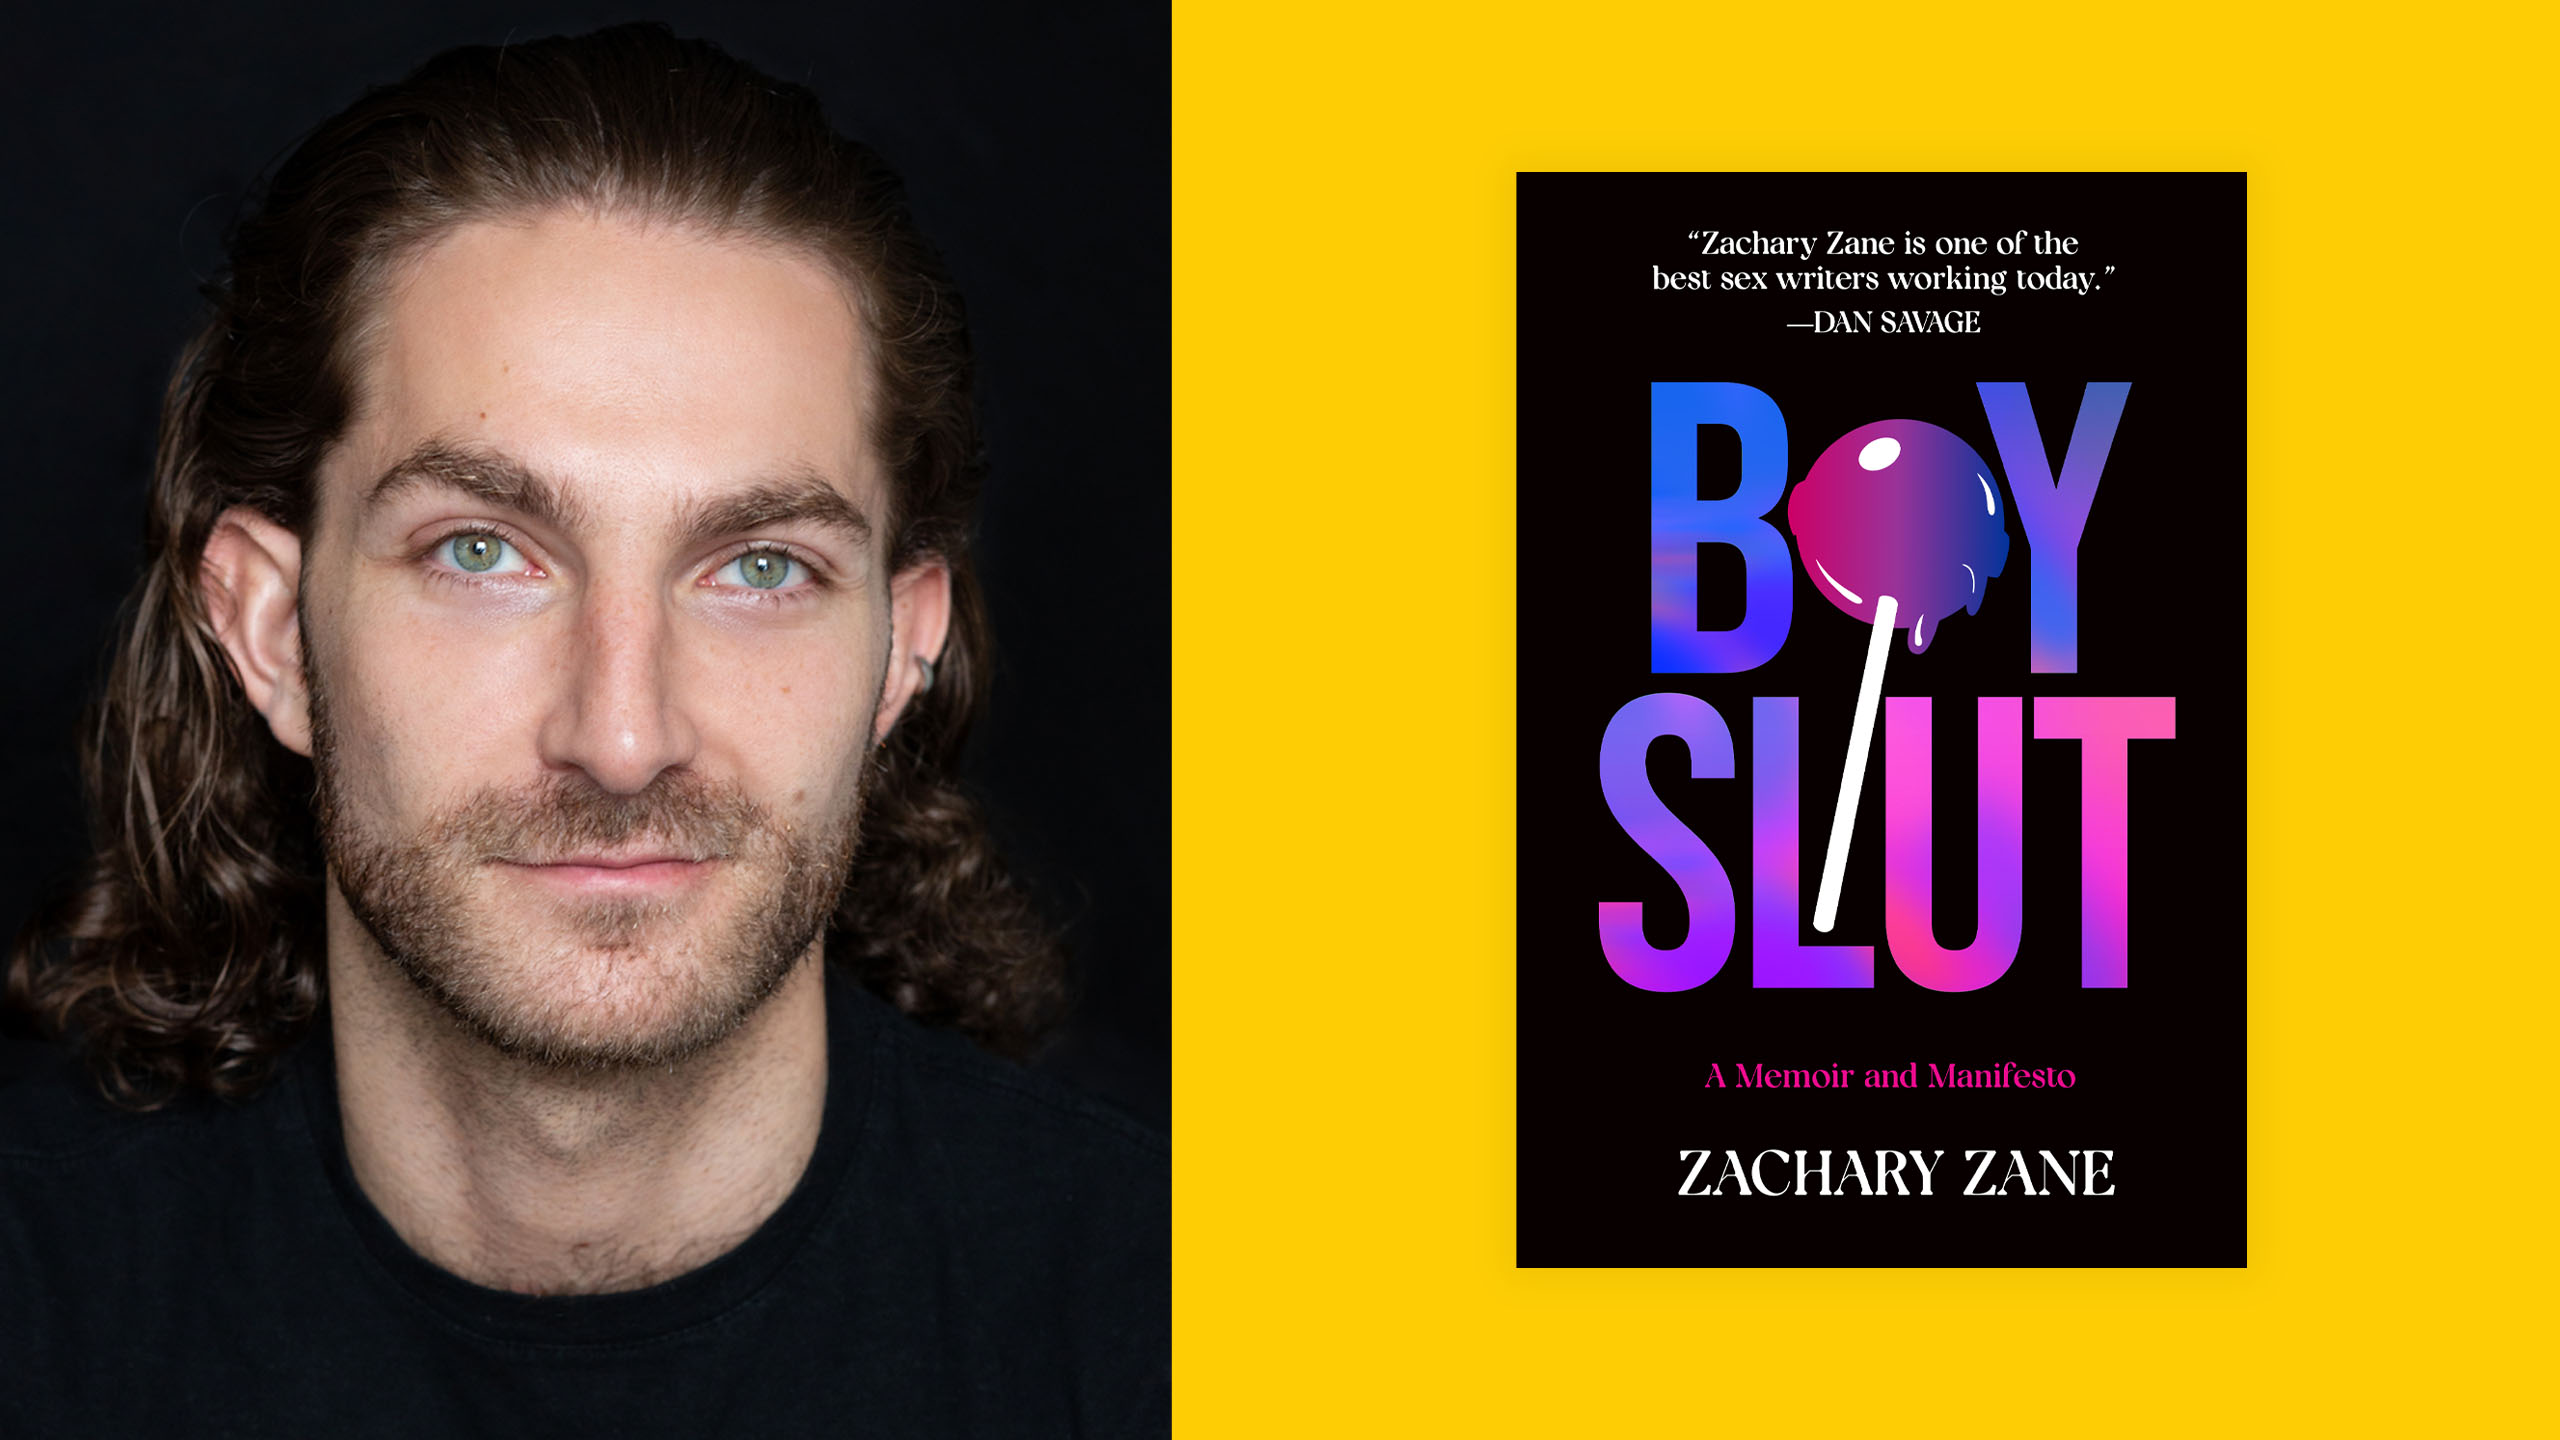 Boyslut offers enlightened smut that shakes up the queer memoir shelf Xtra Magazine